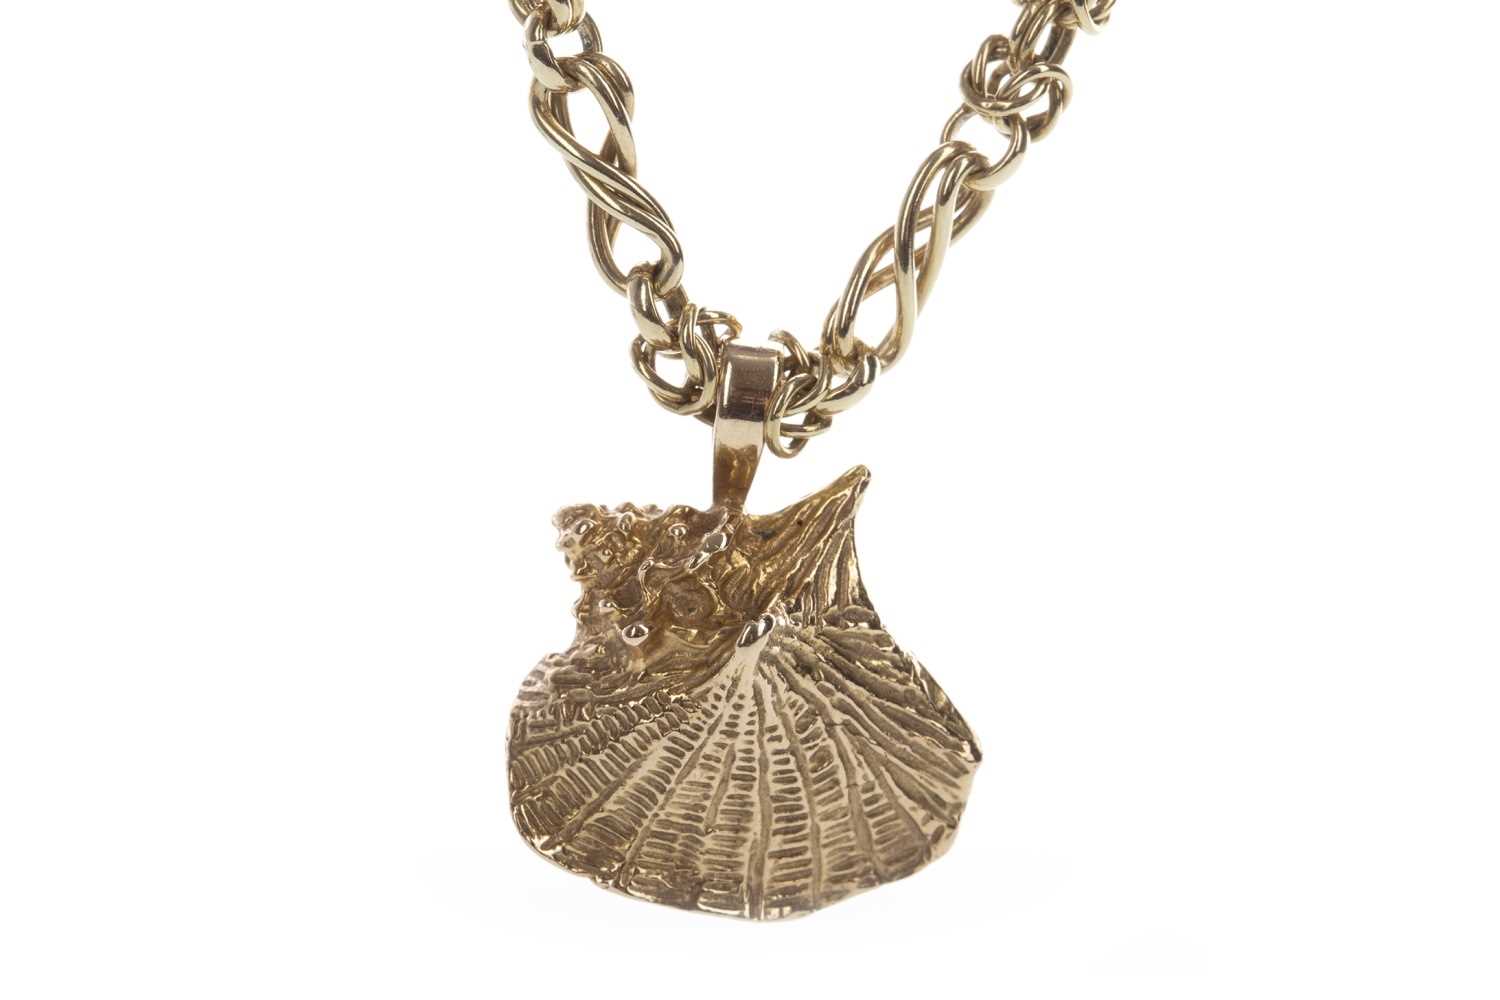 Lot 327 - A GOLD CHAIN WITH SEASHELL PENDANT